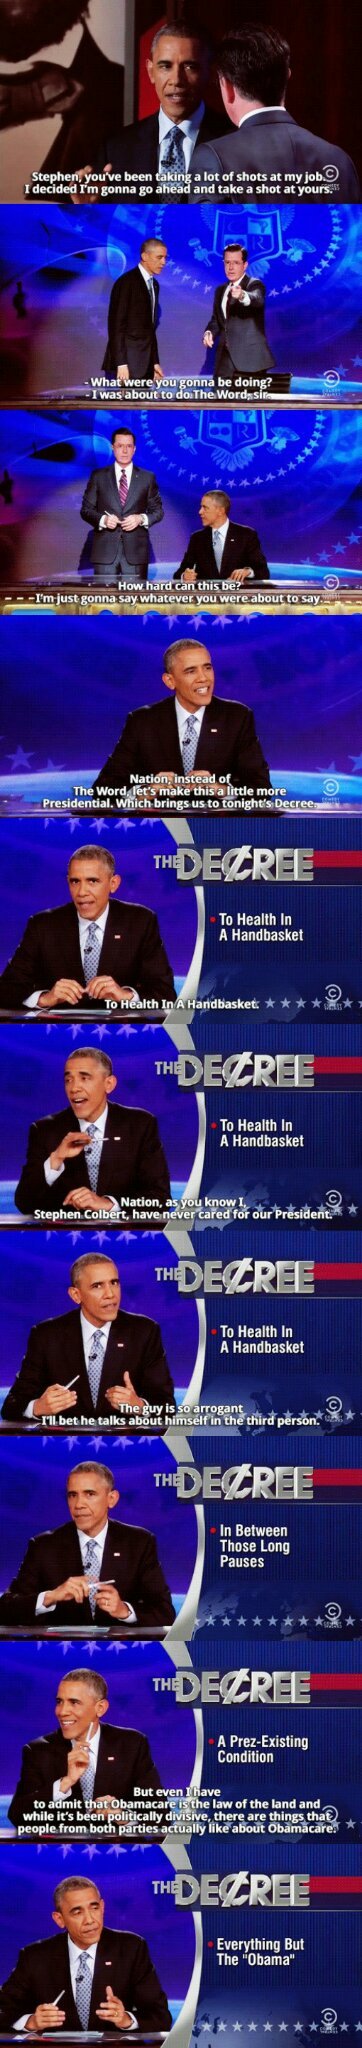 Barack Obama takes over The Word on The Colbert Report - meme